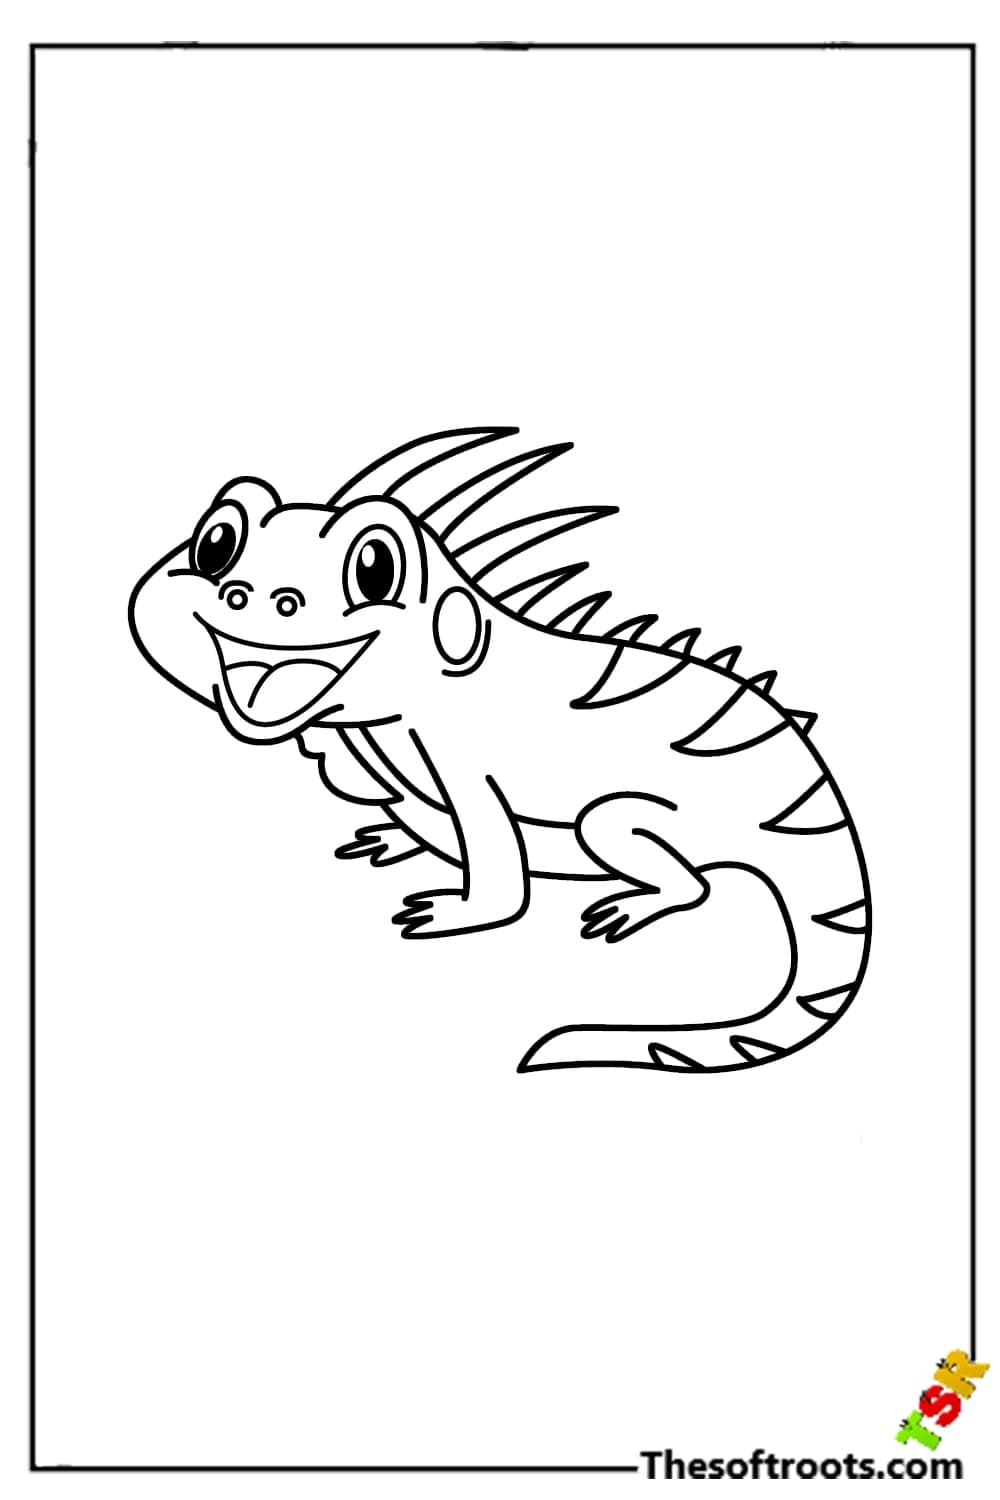 Cute Iguana Coloring pages